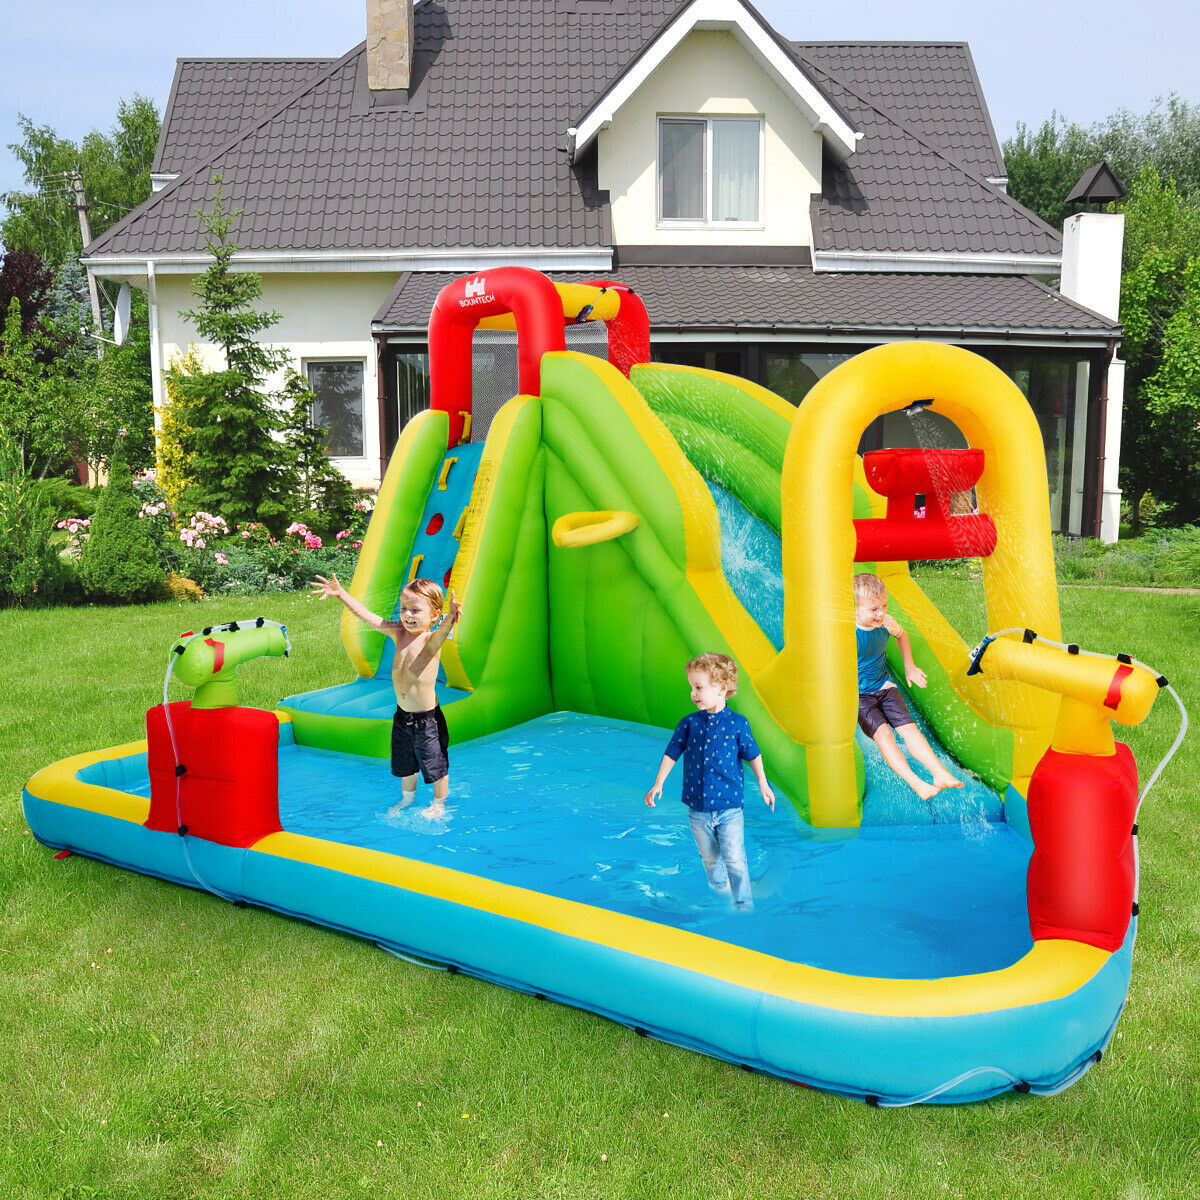 Outdoor Inflatable Splash Water Bounce House Jump Slide W/Blower